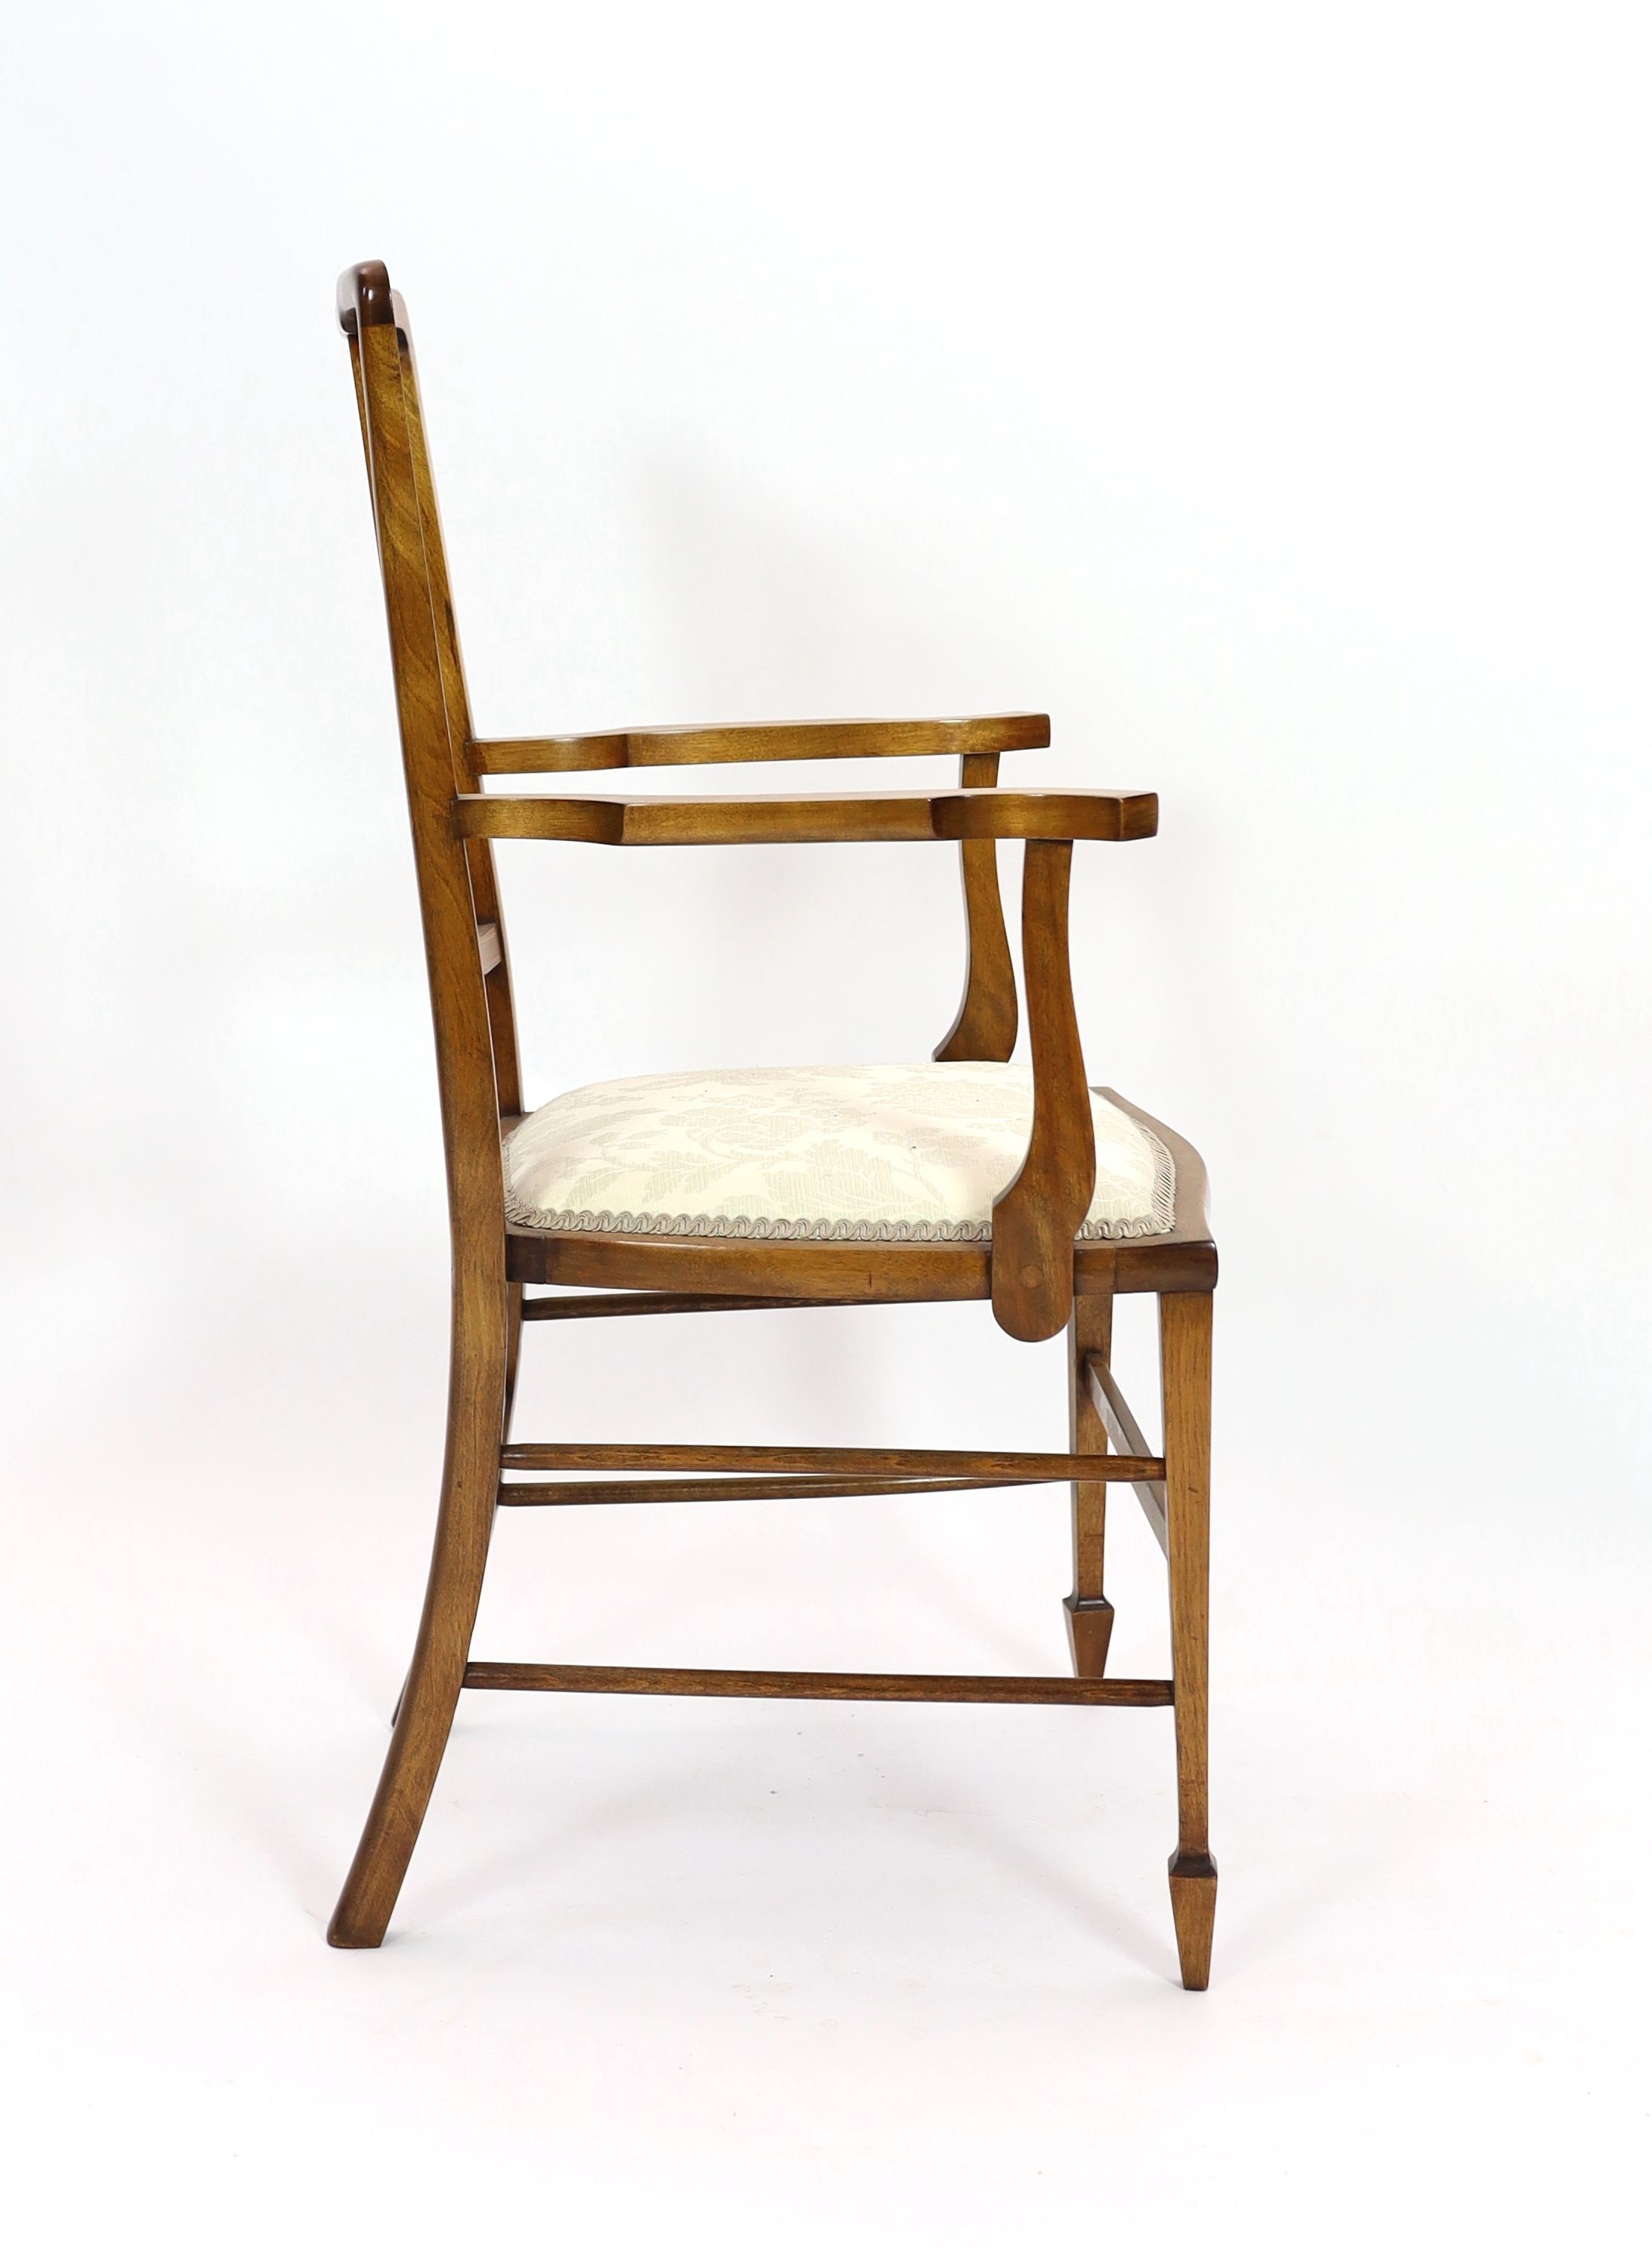 An Edwardian inlaid mahogany elbow chair, width 51cm depth 45cm height 96cm, and two Edwardian dining chairs